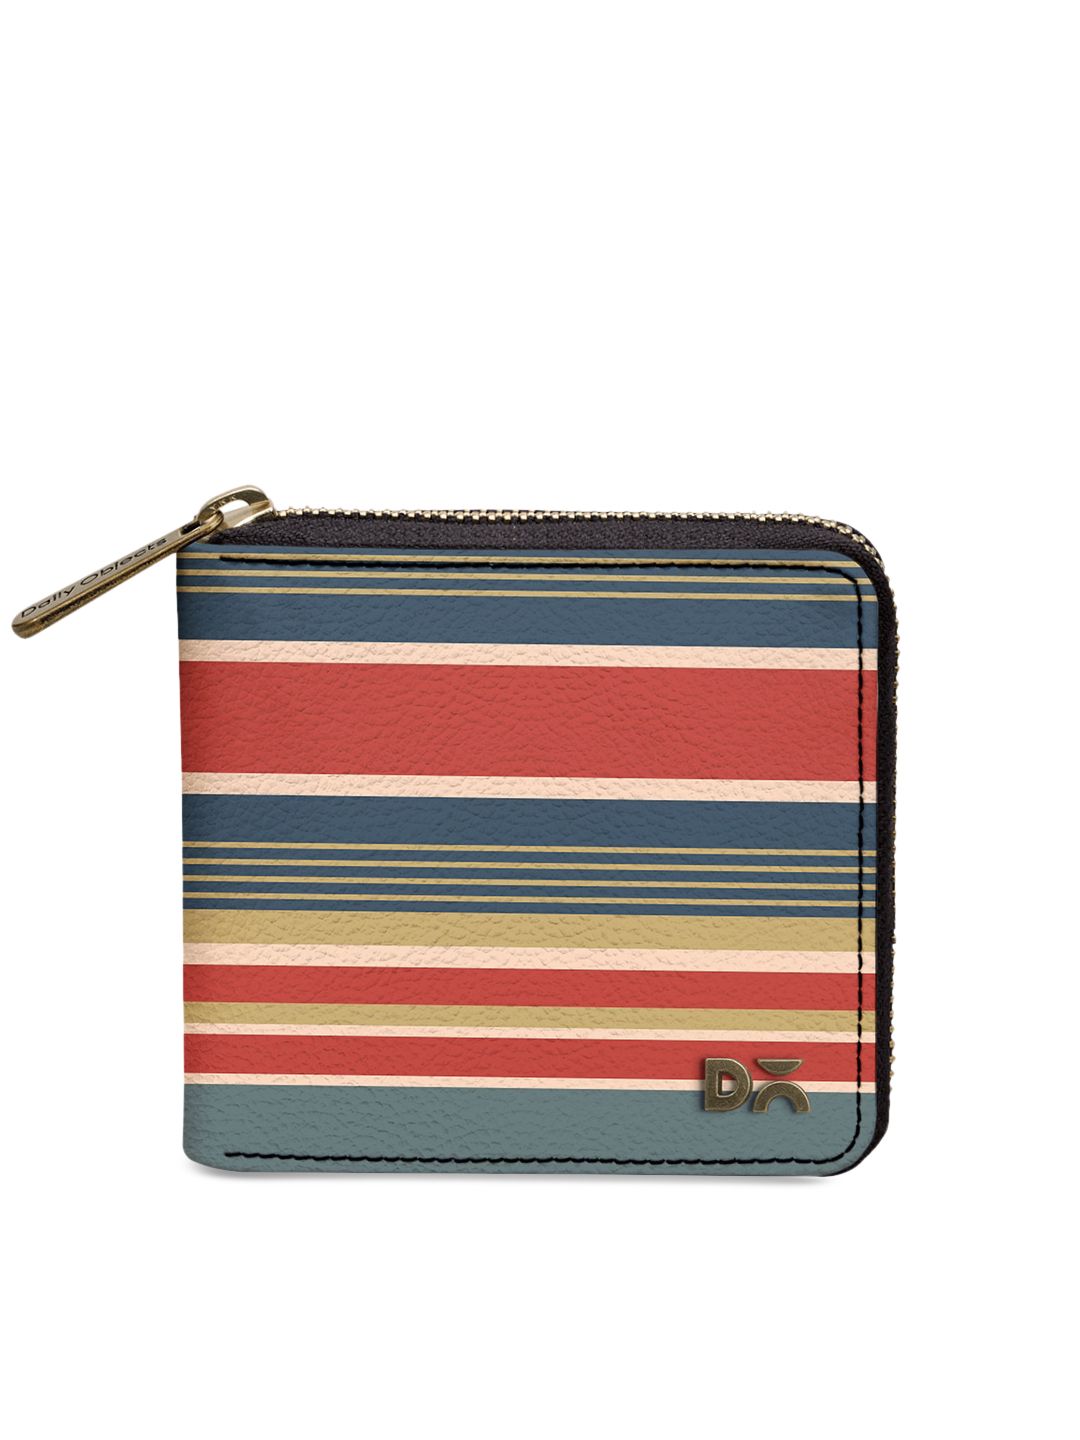 DailyObjects Women Multicoloured Printed Zip Around Wallet Price in India